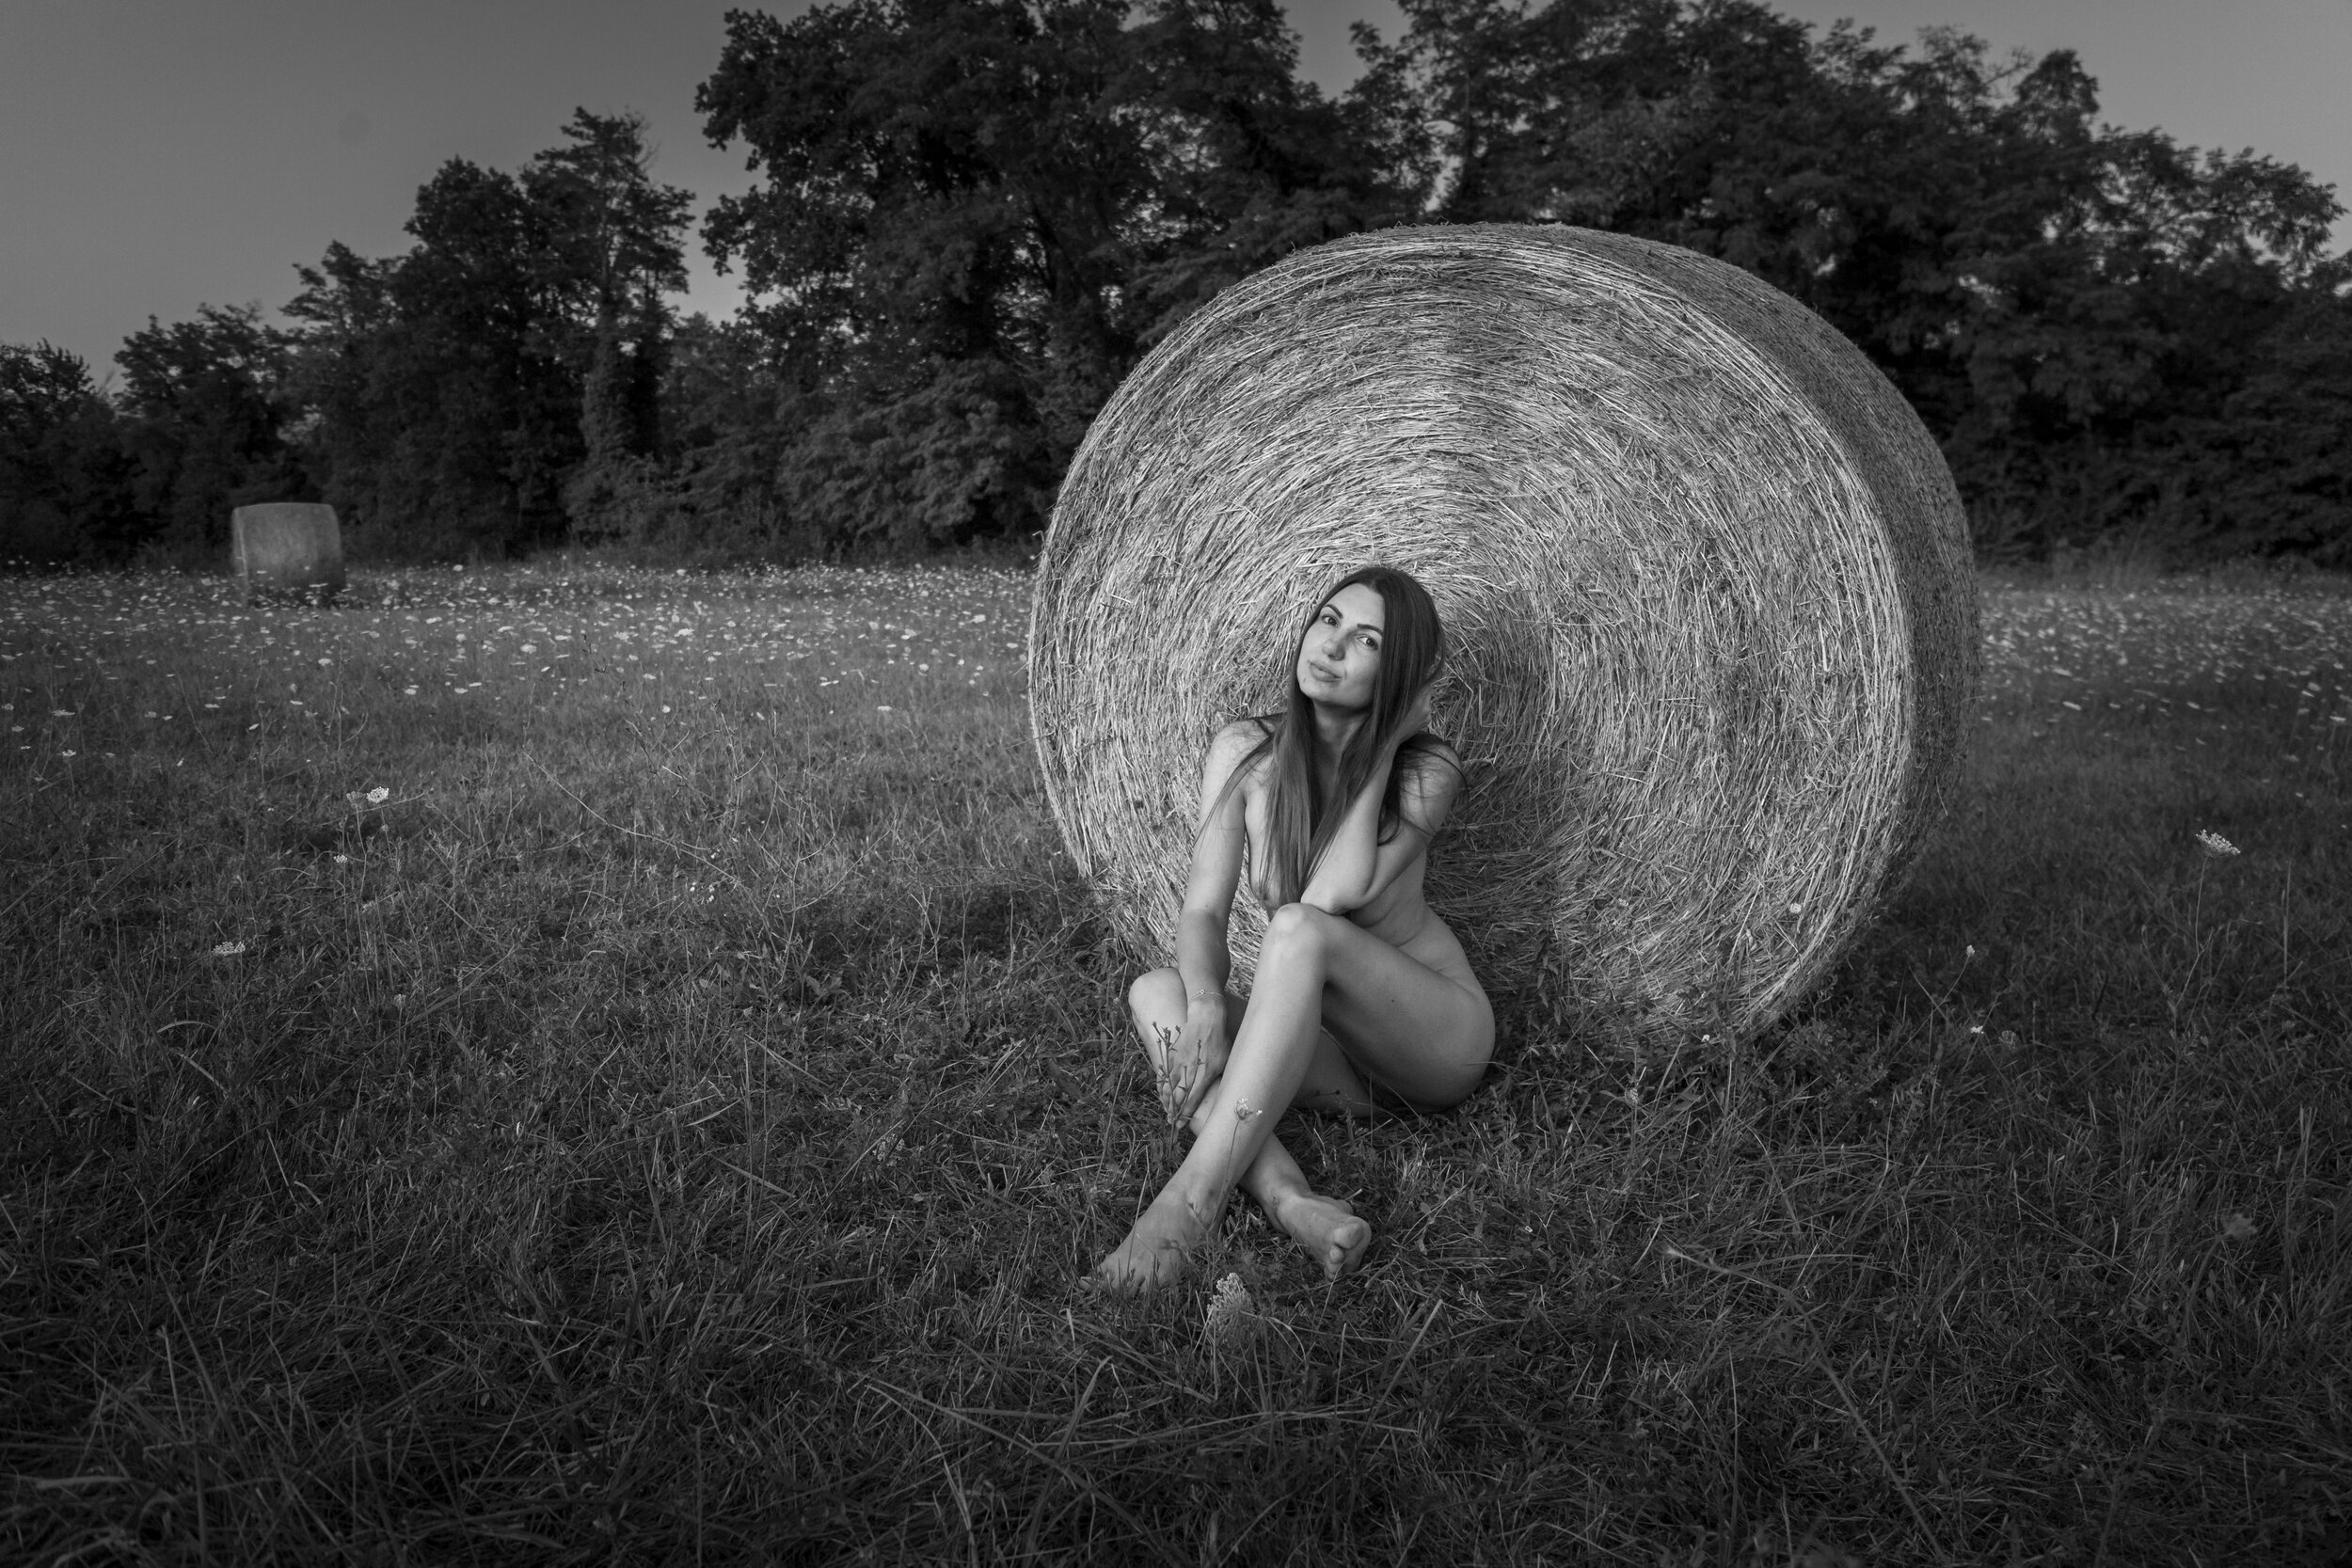 Alla naked in front of Hay